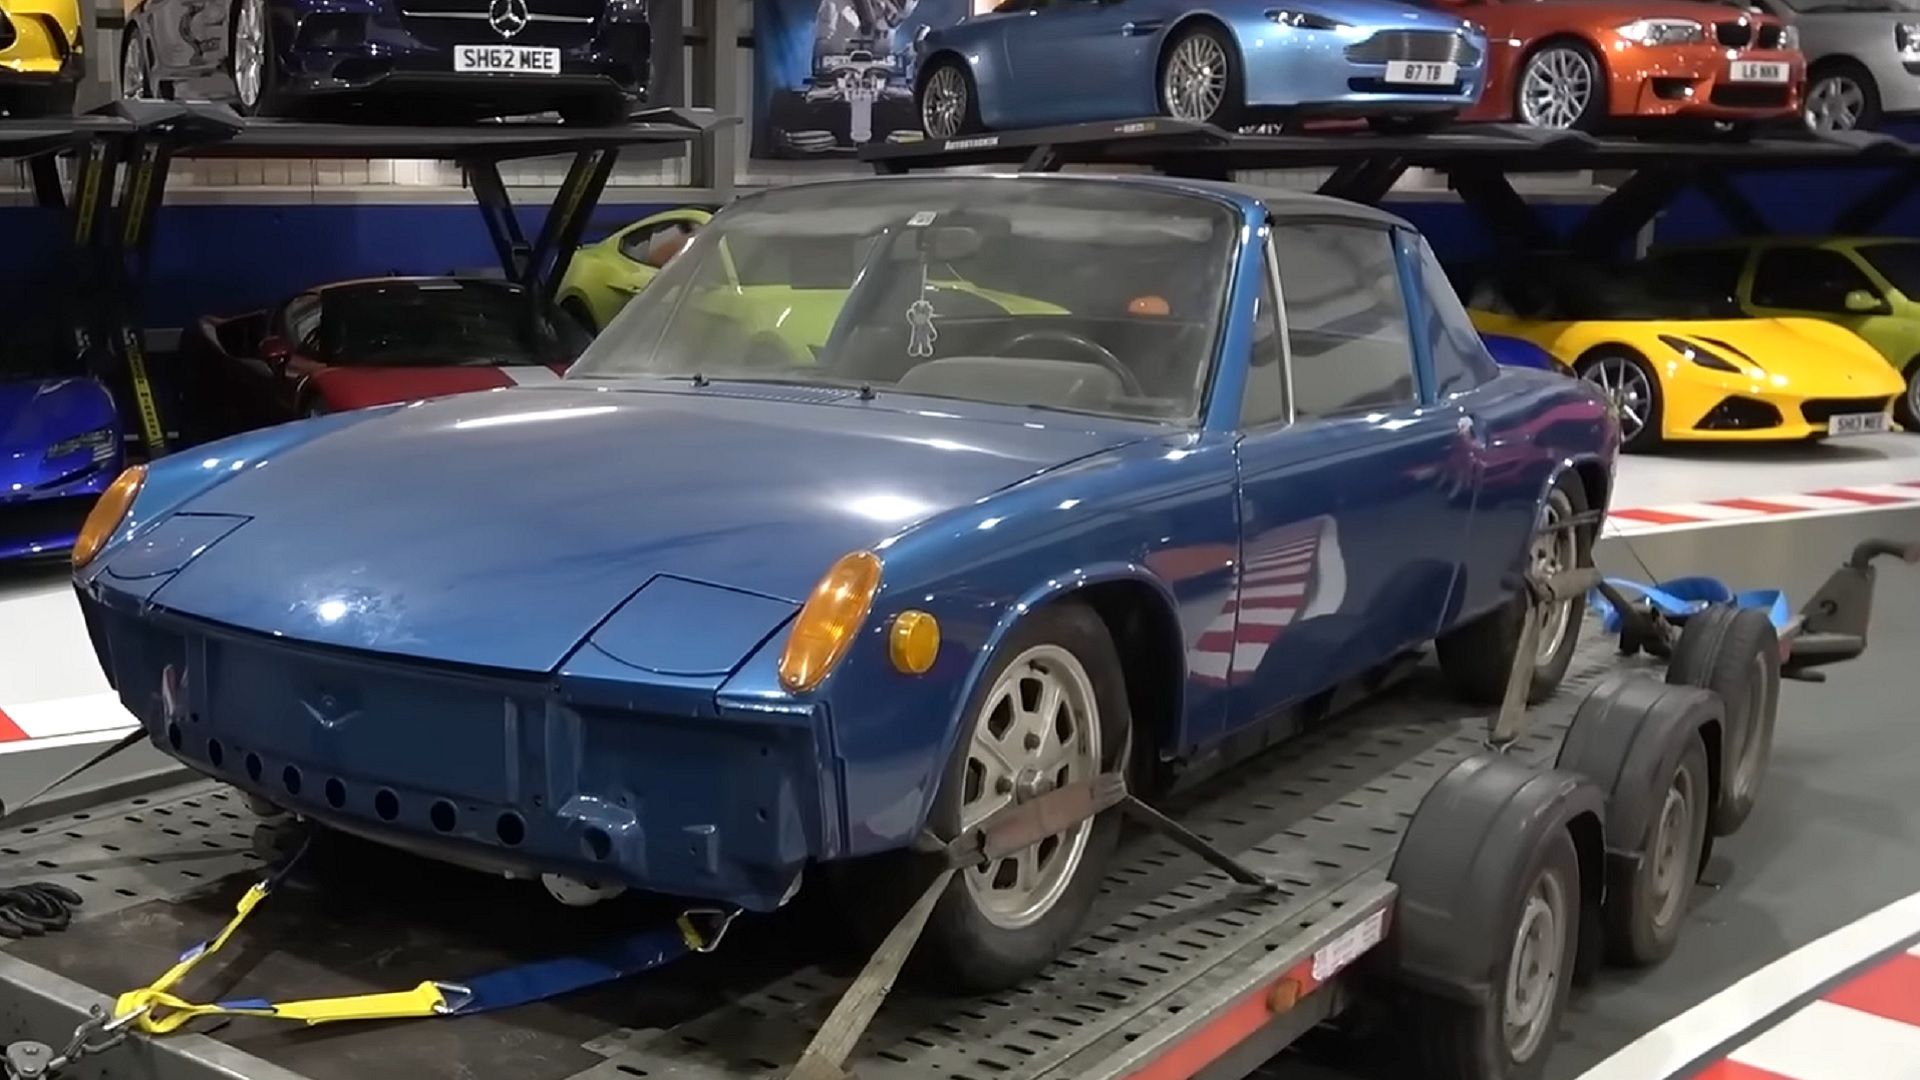 Find Out Everything Wrong With This Abandoned Porsche 914